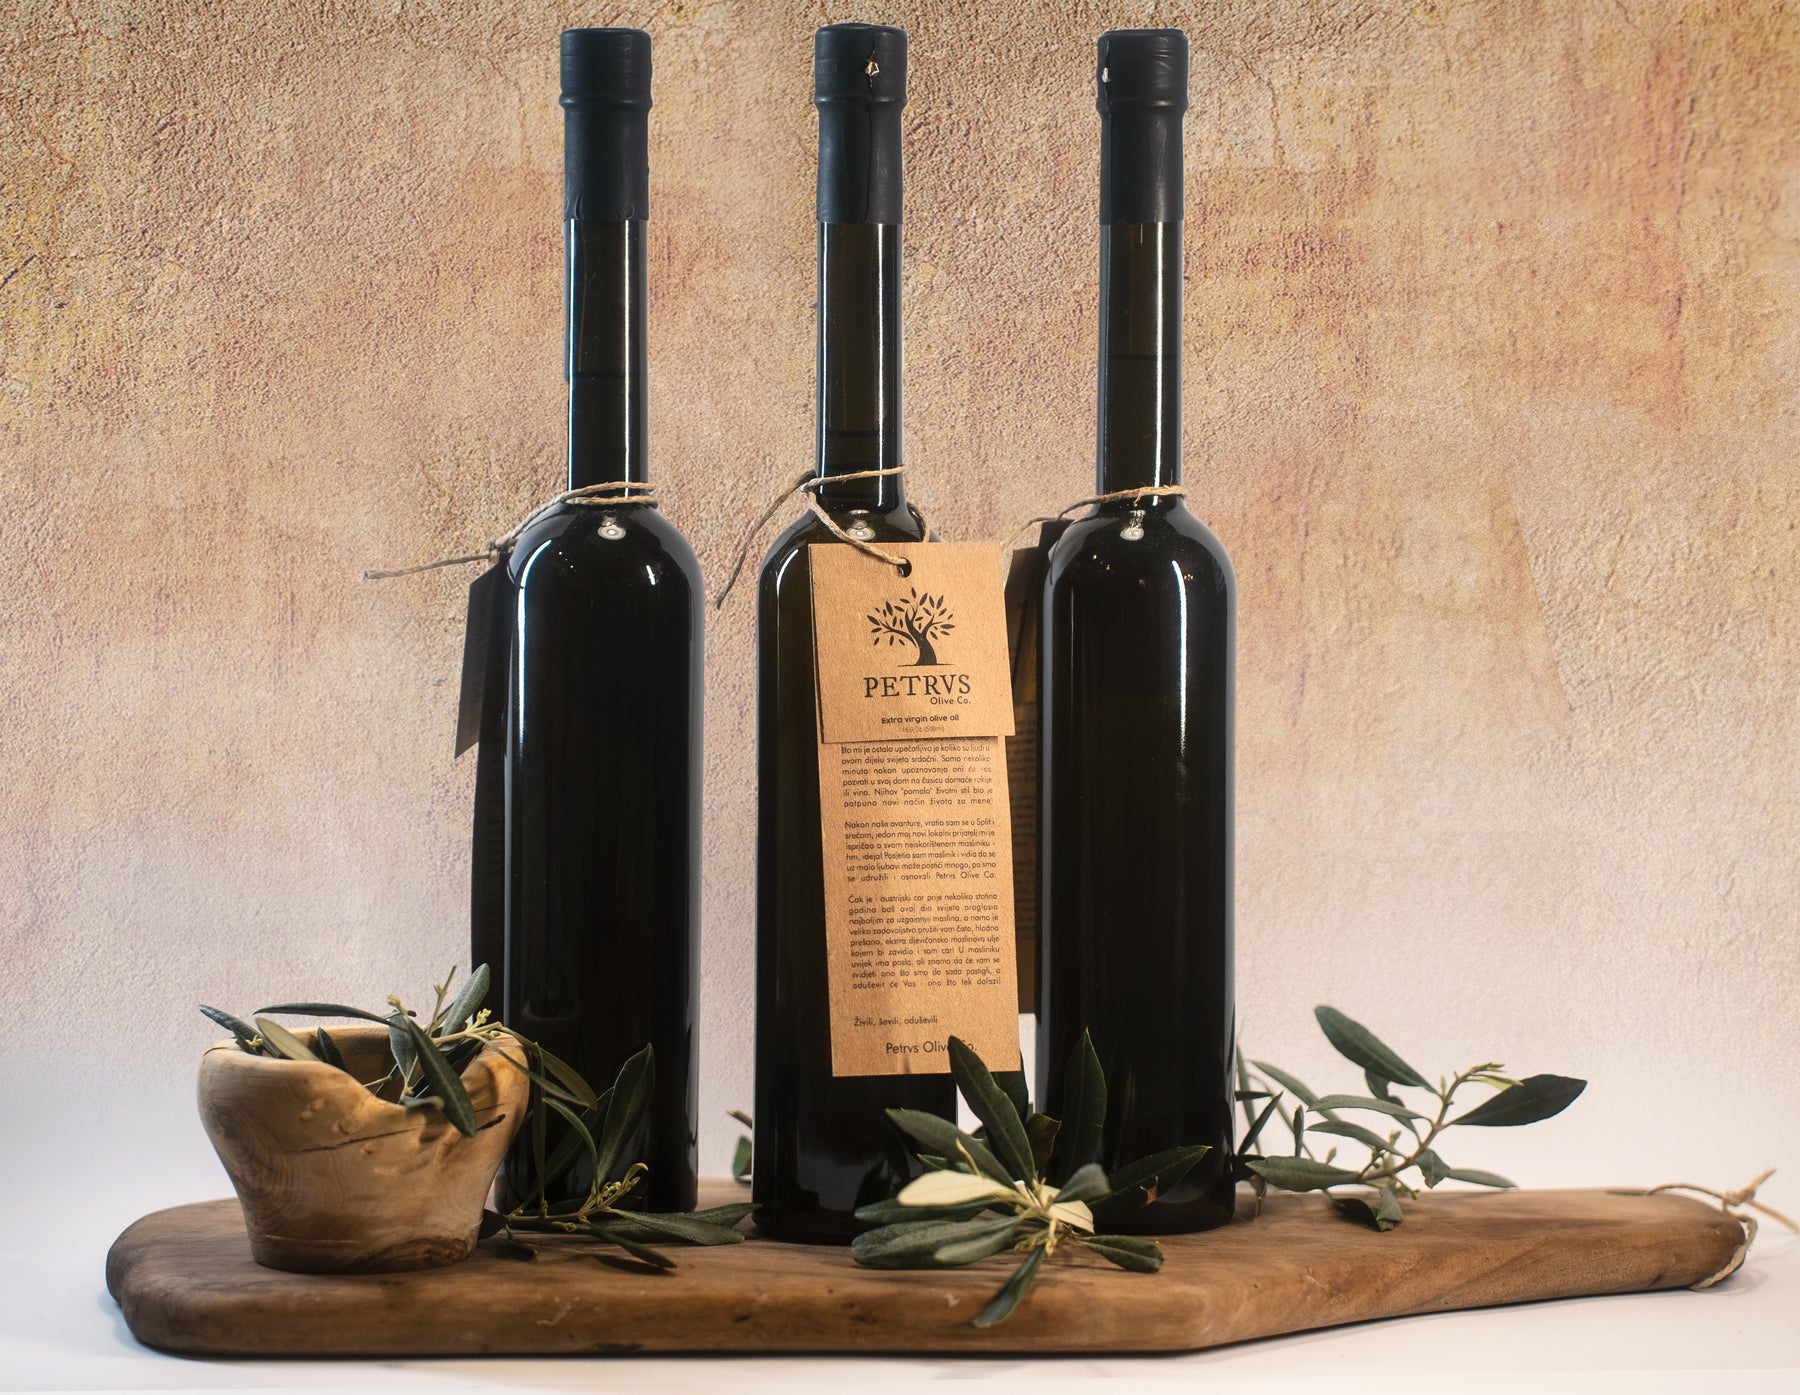 Premium Petrvs olive oil bottles displayed on a wooden board with olive branches against a textured background.